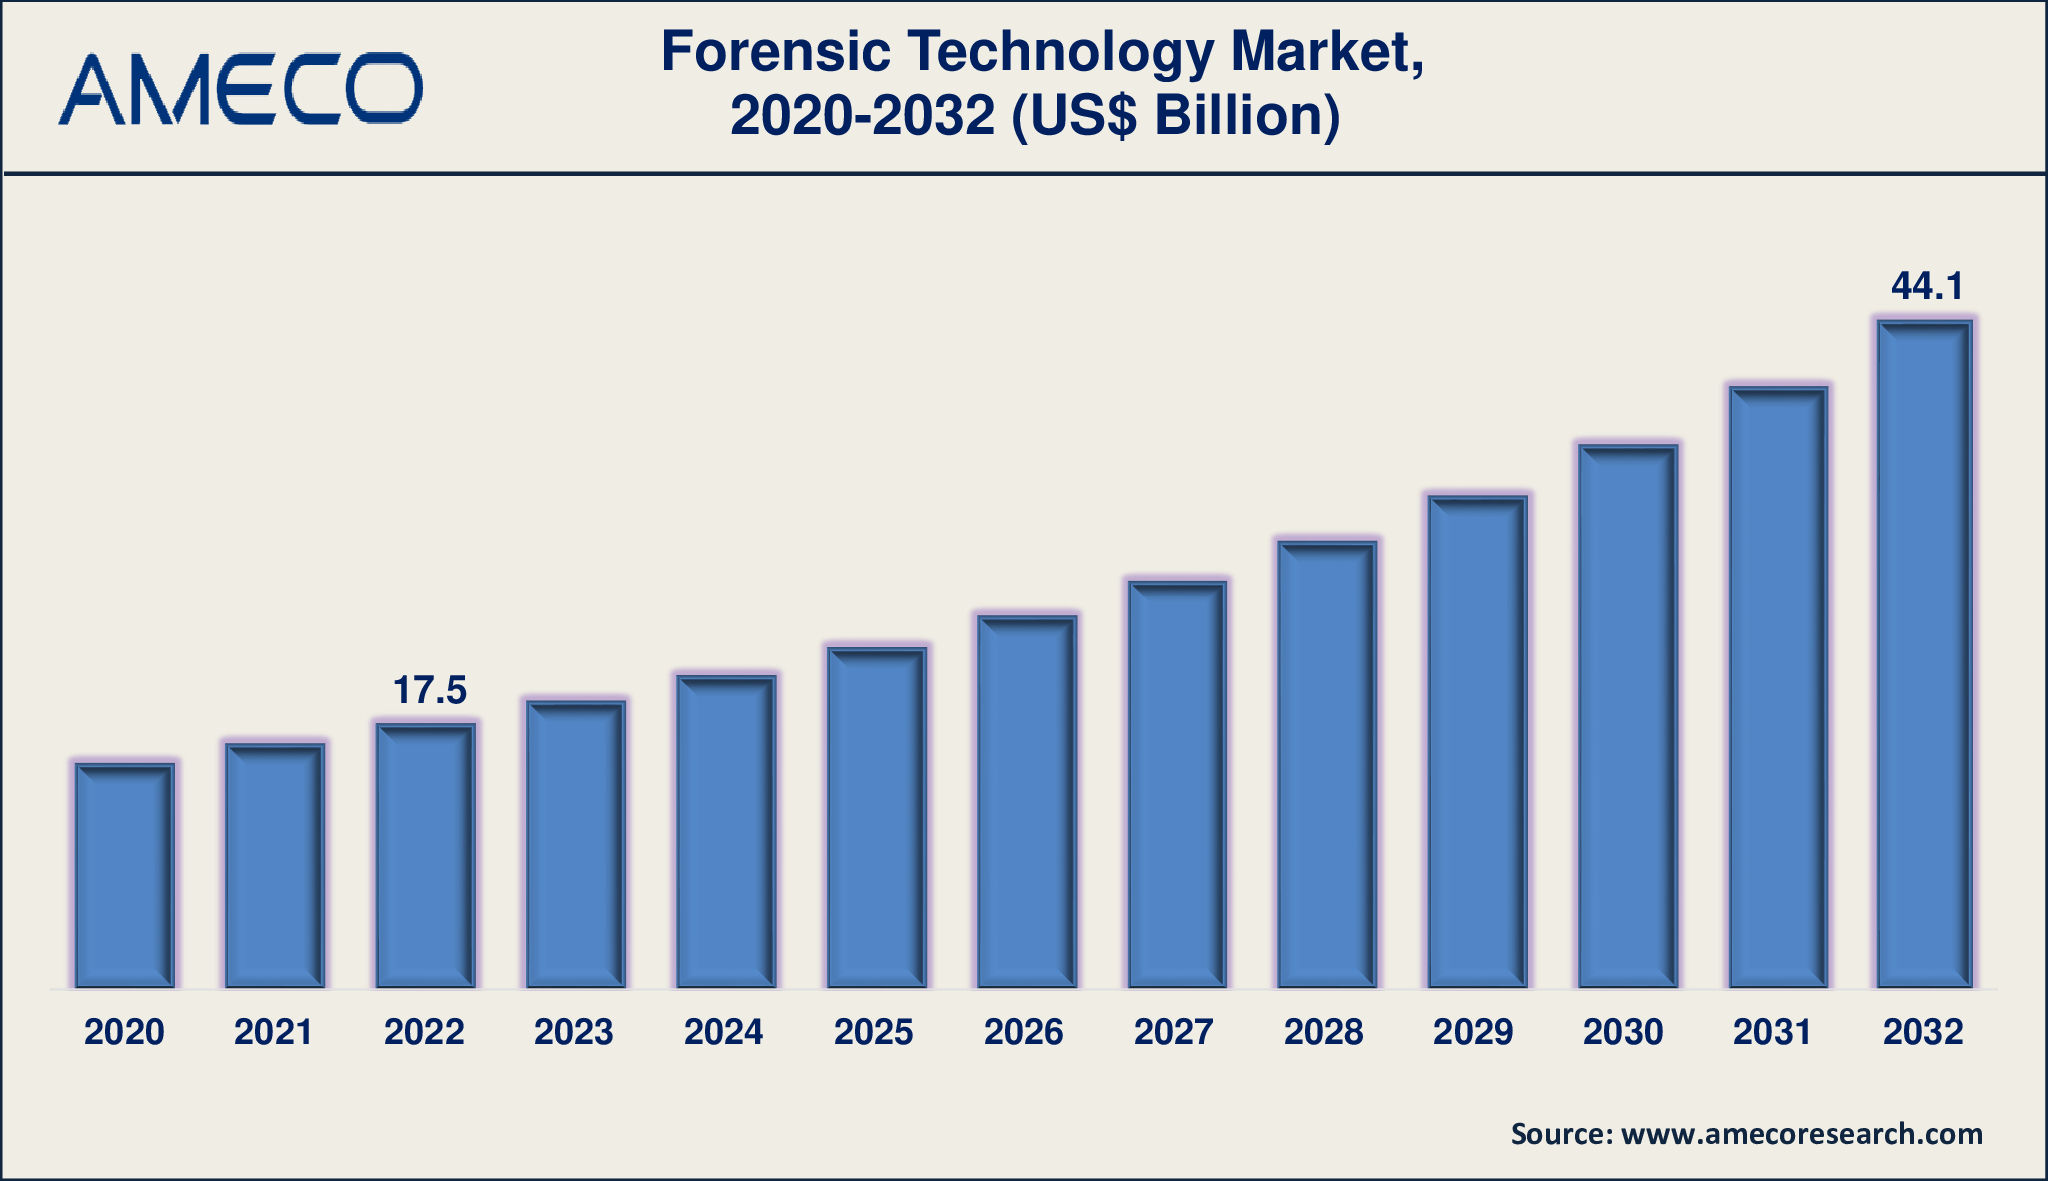 Forensic Technology Market Trends